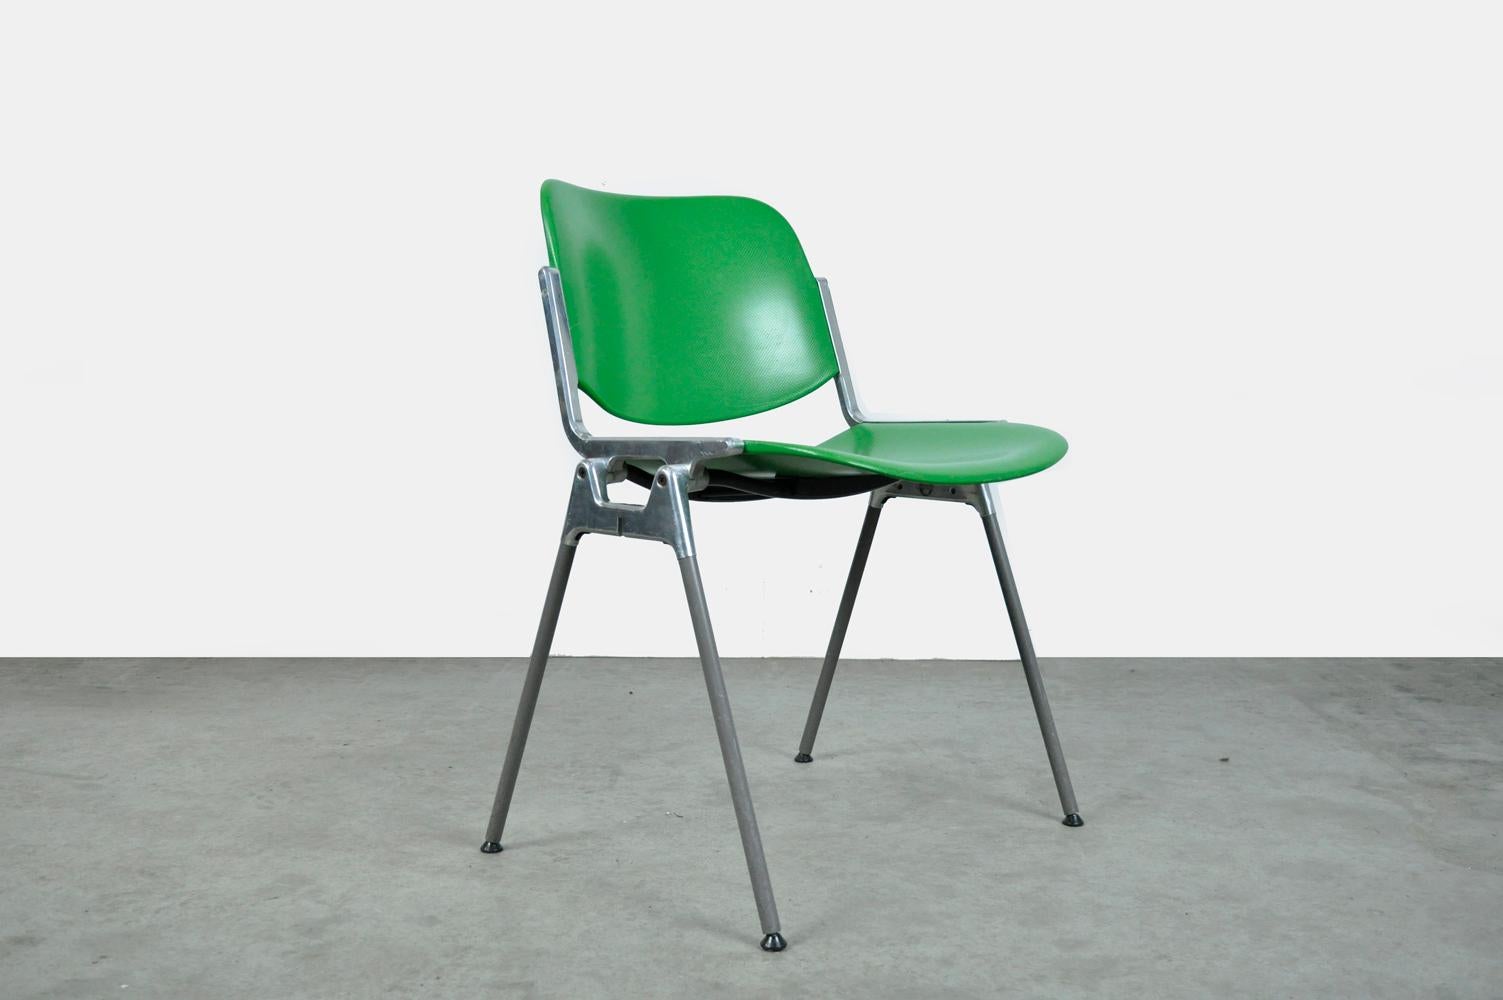 Designer chairs, type DSC Axis 106, designed in the 1960s by Giancarlo Piretti for Castelli, Italy. The 10 chairs have green plastic upholstery, aluminum frame, steel legs with gray plastic sleeves and black plastic feet. 